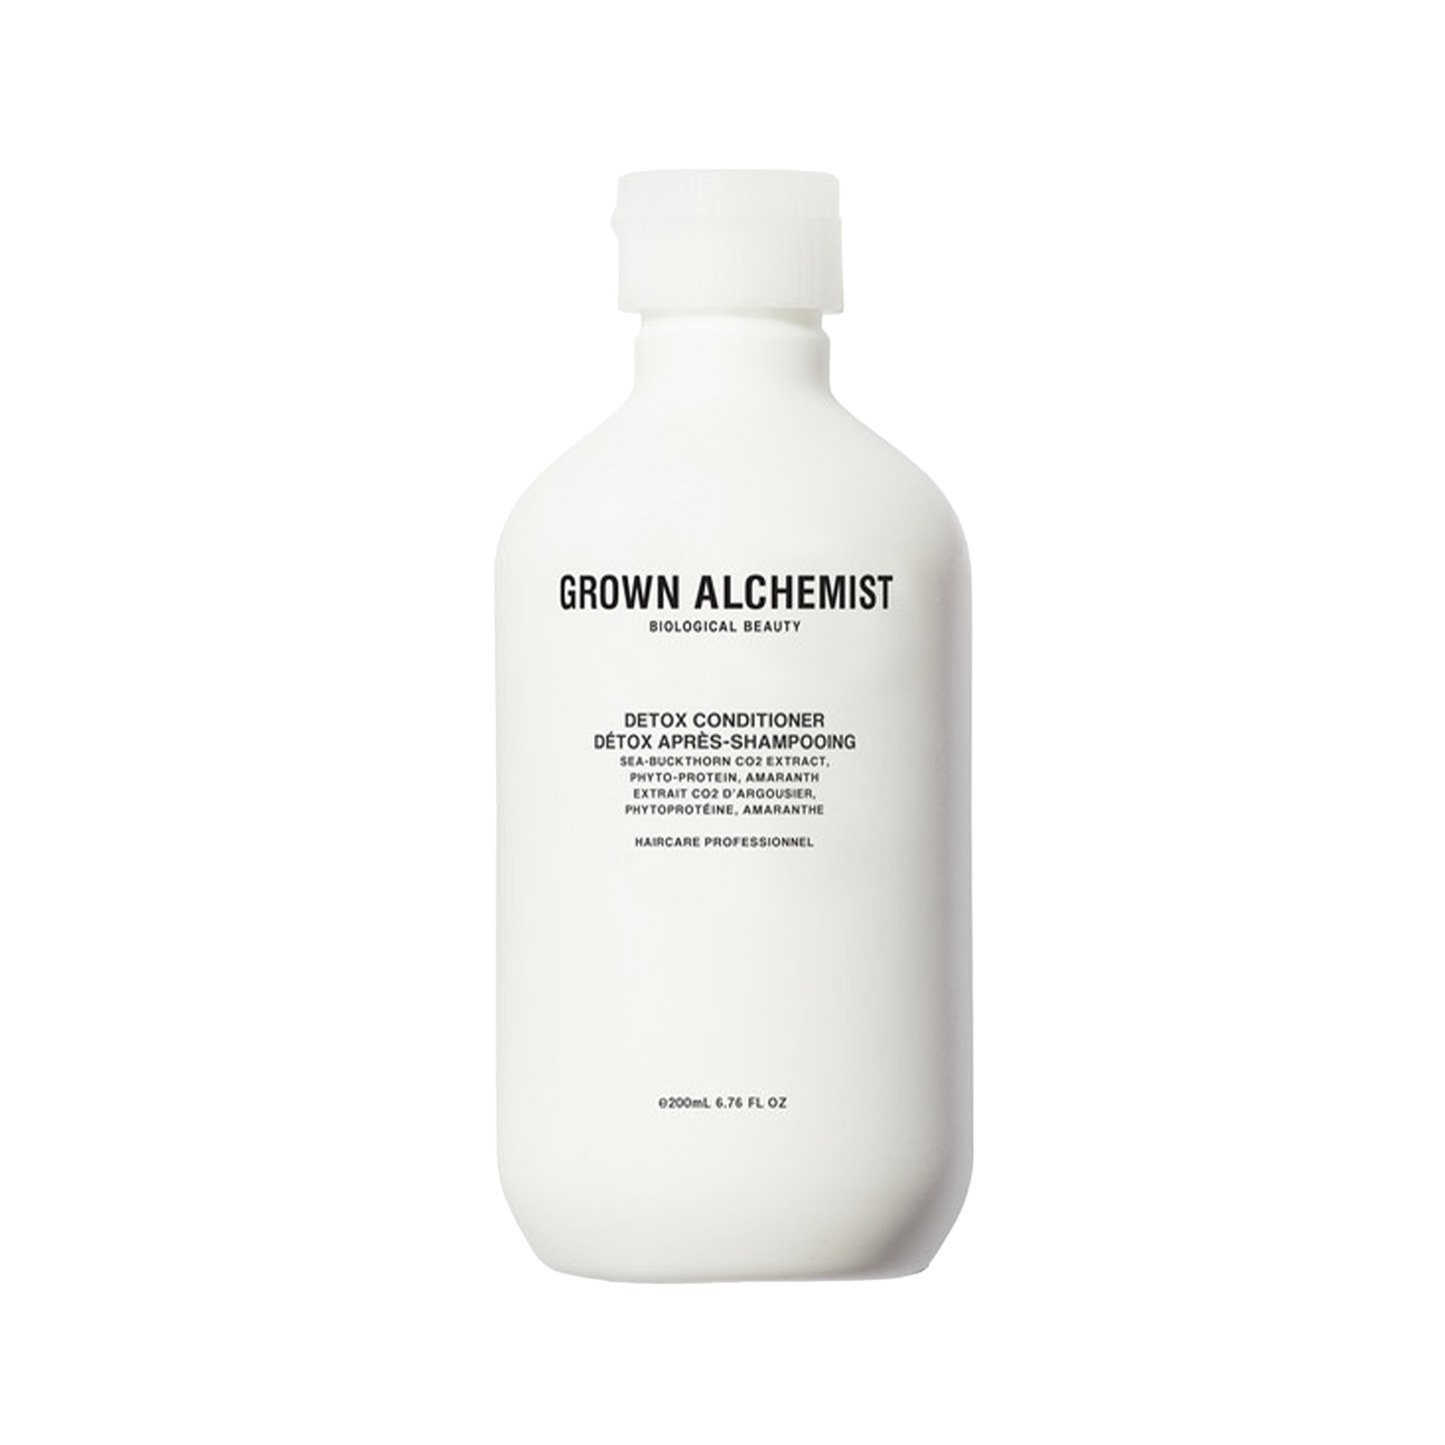 Grown Alchemist Detox - Conditioner 0.1: A targeted formulation that conditions and detoxifies the hair and scalp of free radicals metabolized by the body as a result of factors like diet, and environmental factors like heavy metals found in air pollution and UVB/UVA rays from the sun. Perfect for daily use, it maintains and enhances a healthier shine, noticeably strengthening, detangling, softening, protecting and detoxing the hair.